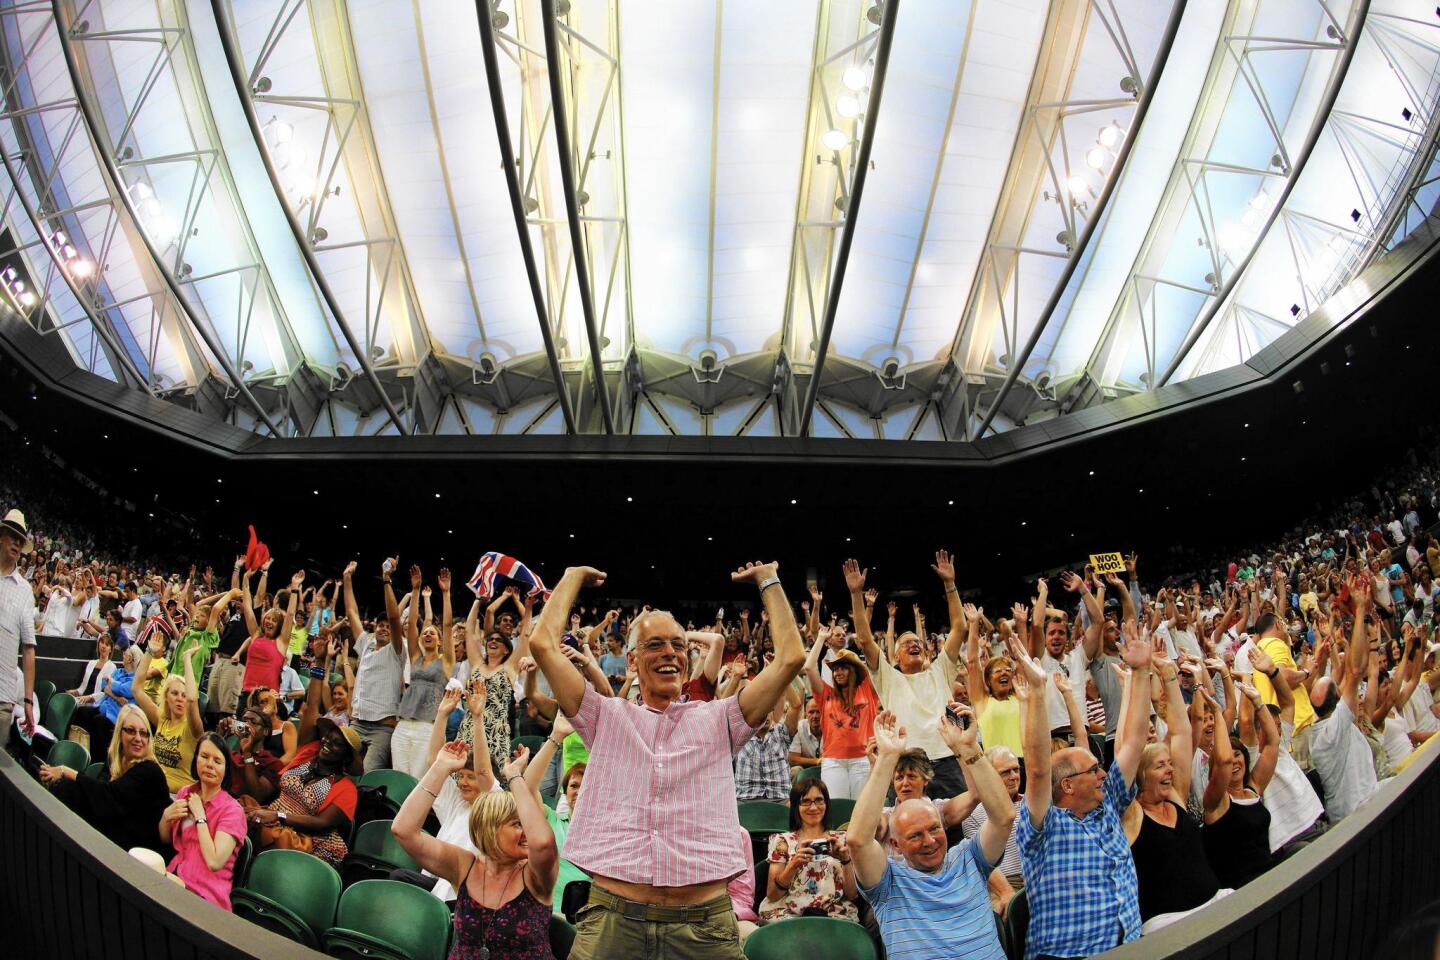 Spectators enjoy the atmosphere under the closed roof on Centre Court as Andy Murray of Great Britain plays Stanislas Wawrinka of Switzerland at Wimbledon in 2009.